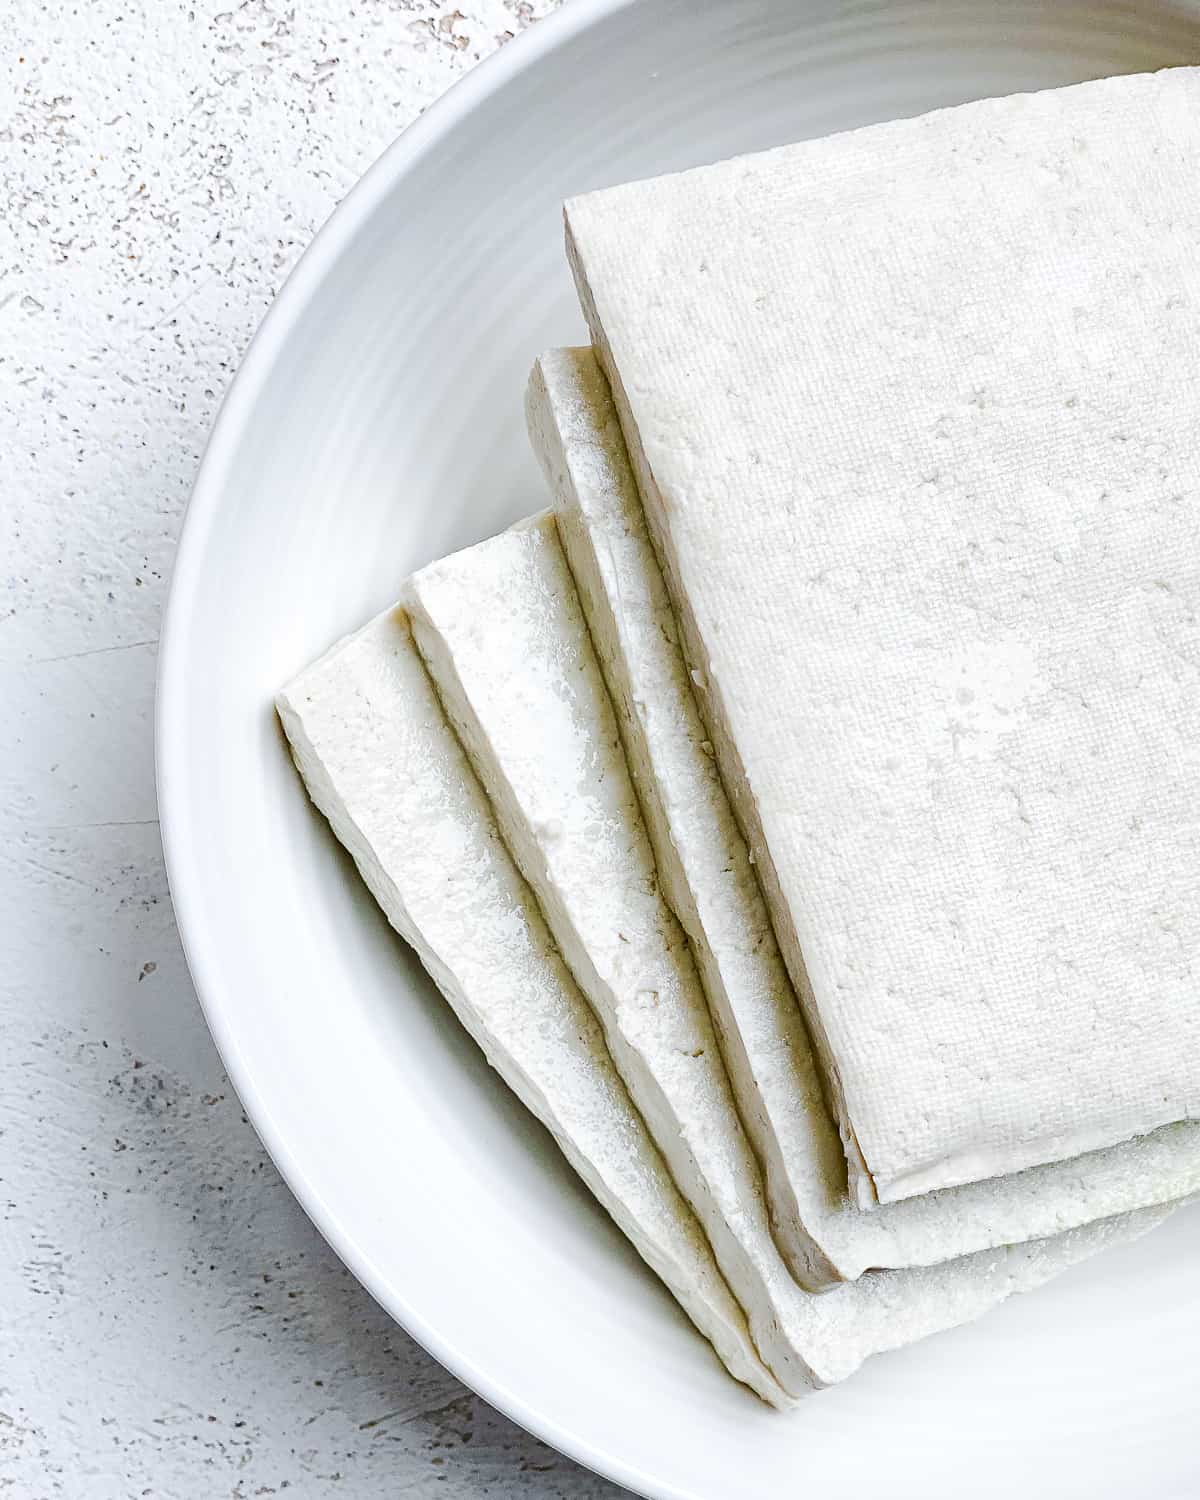 sliced tofu on a white plate against a white background